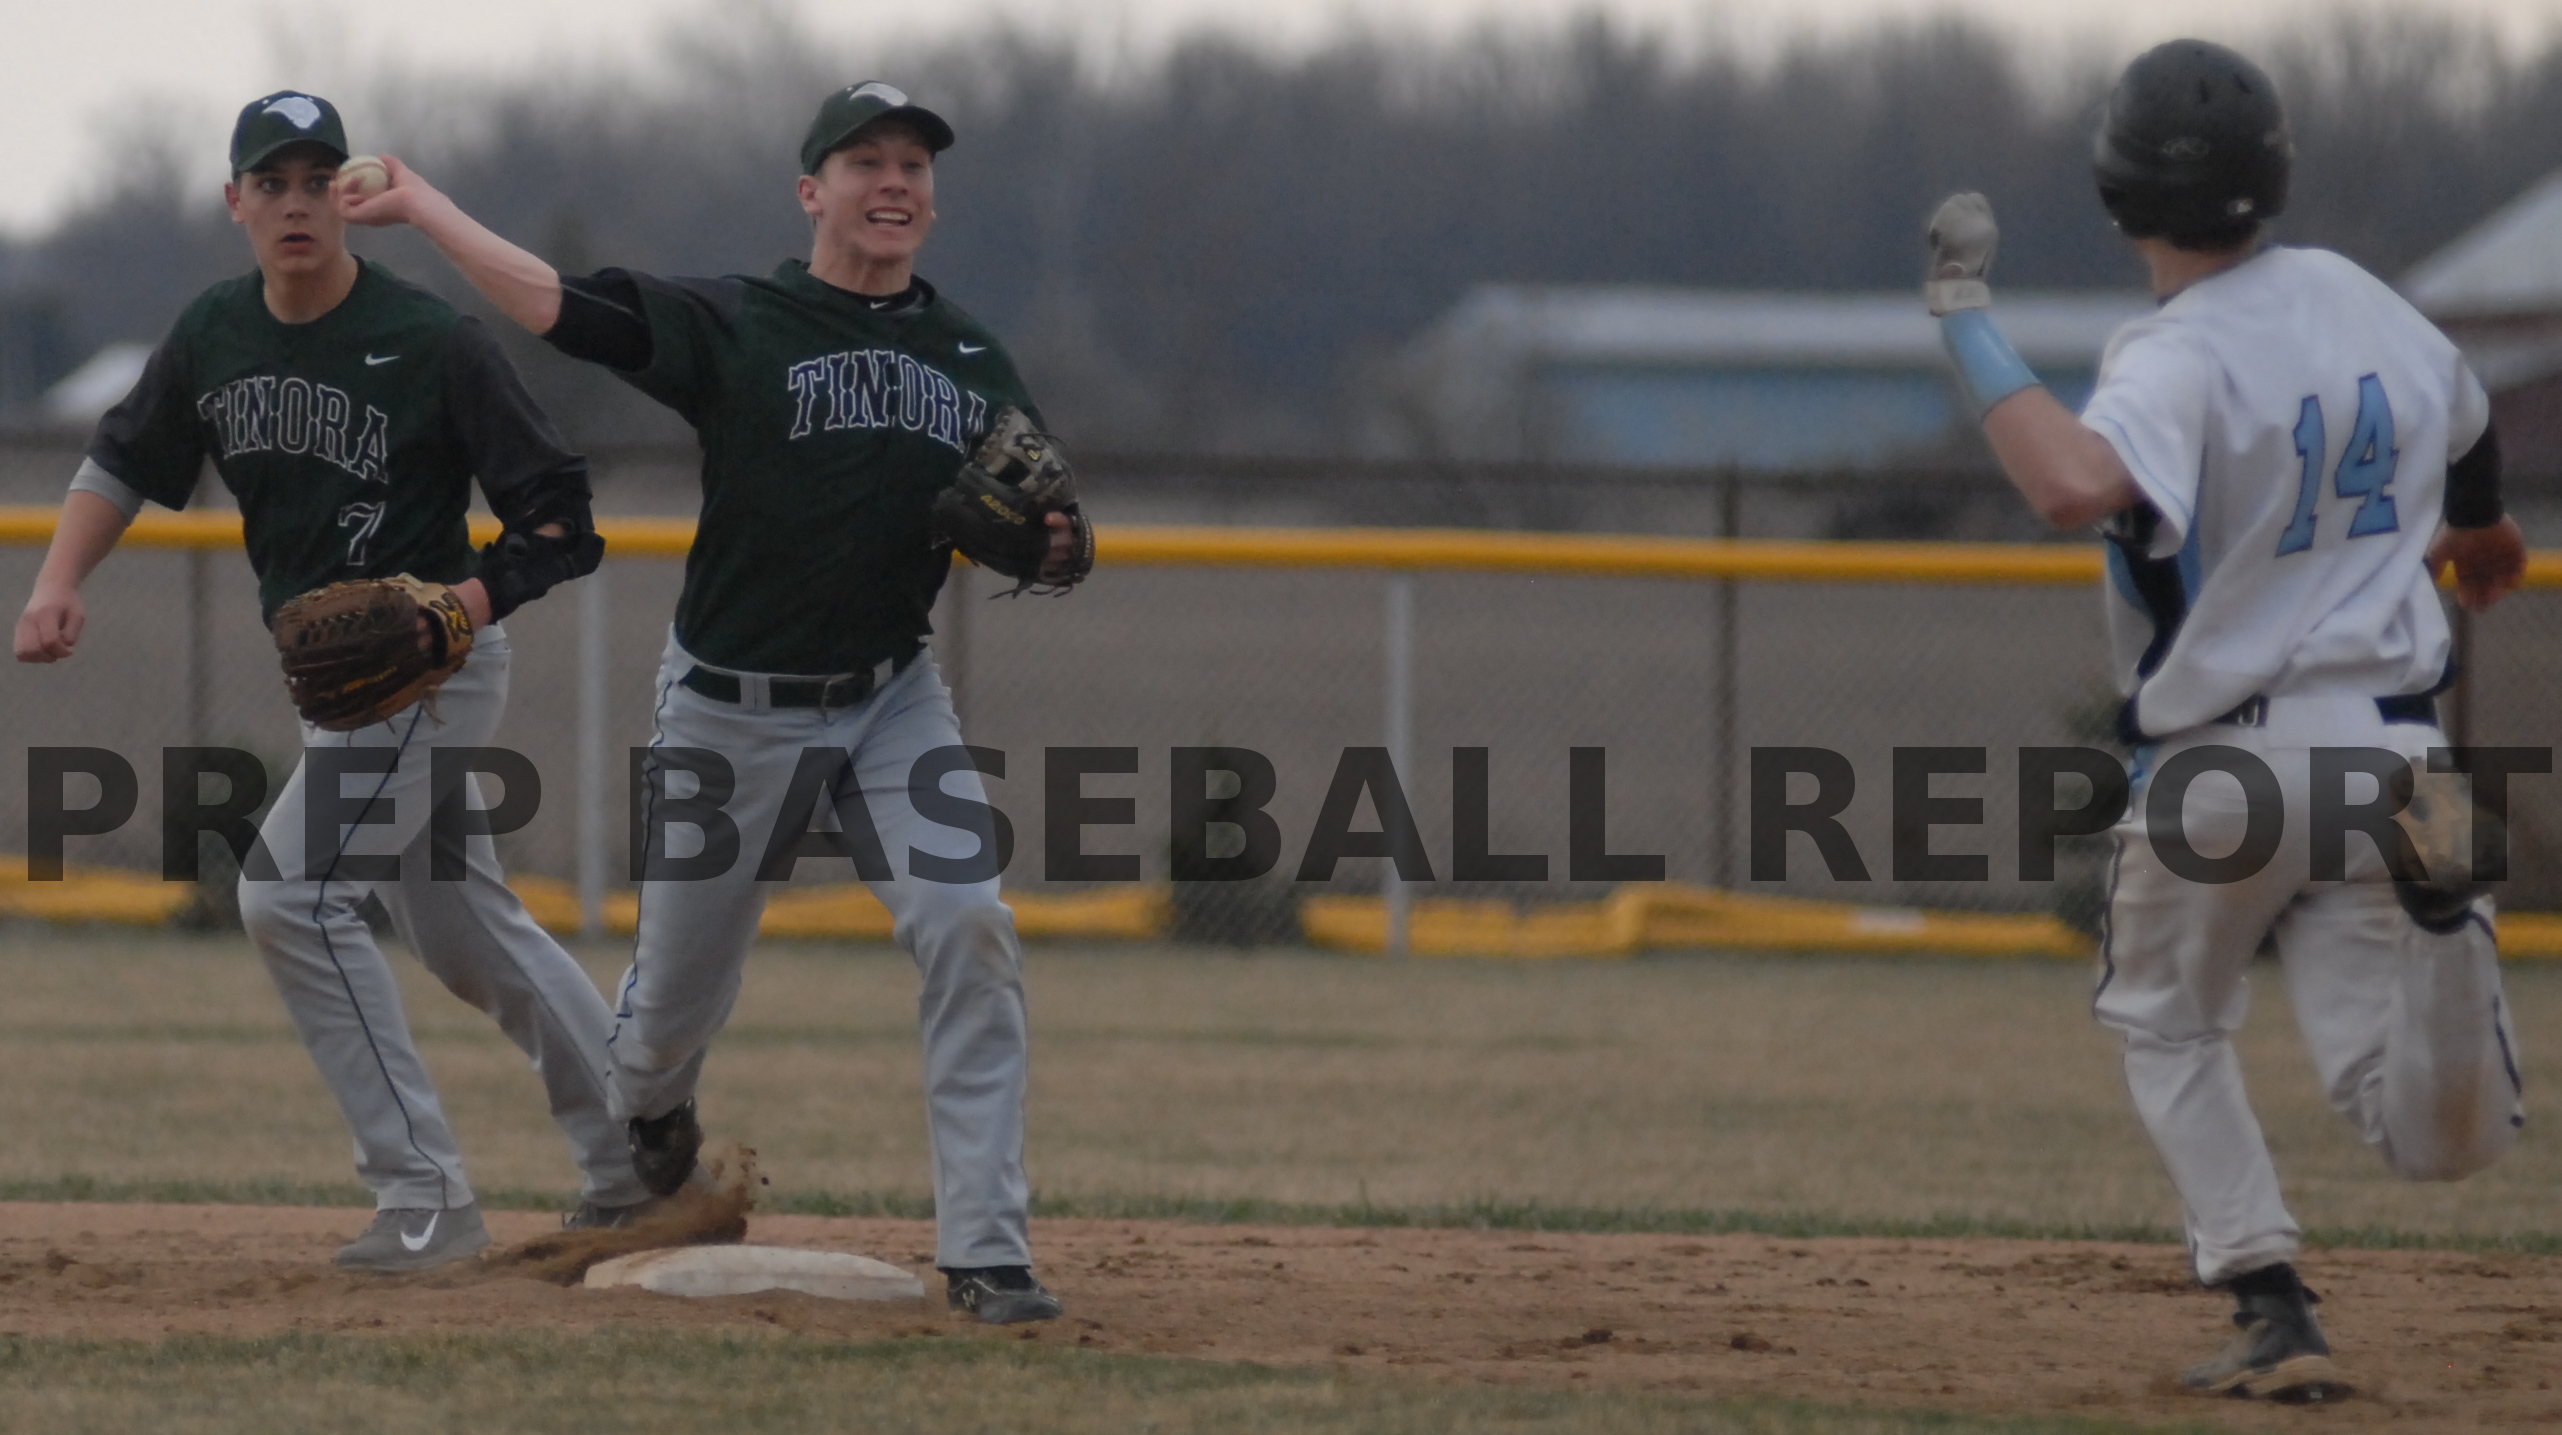 Drewes double play vs Tinora